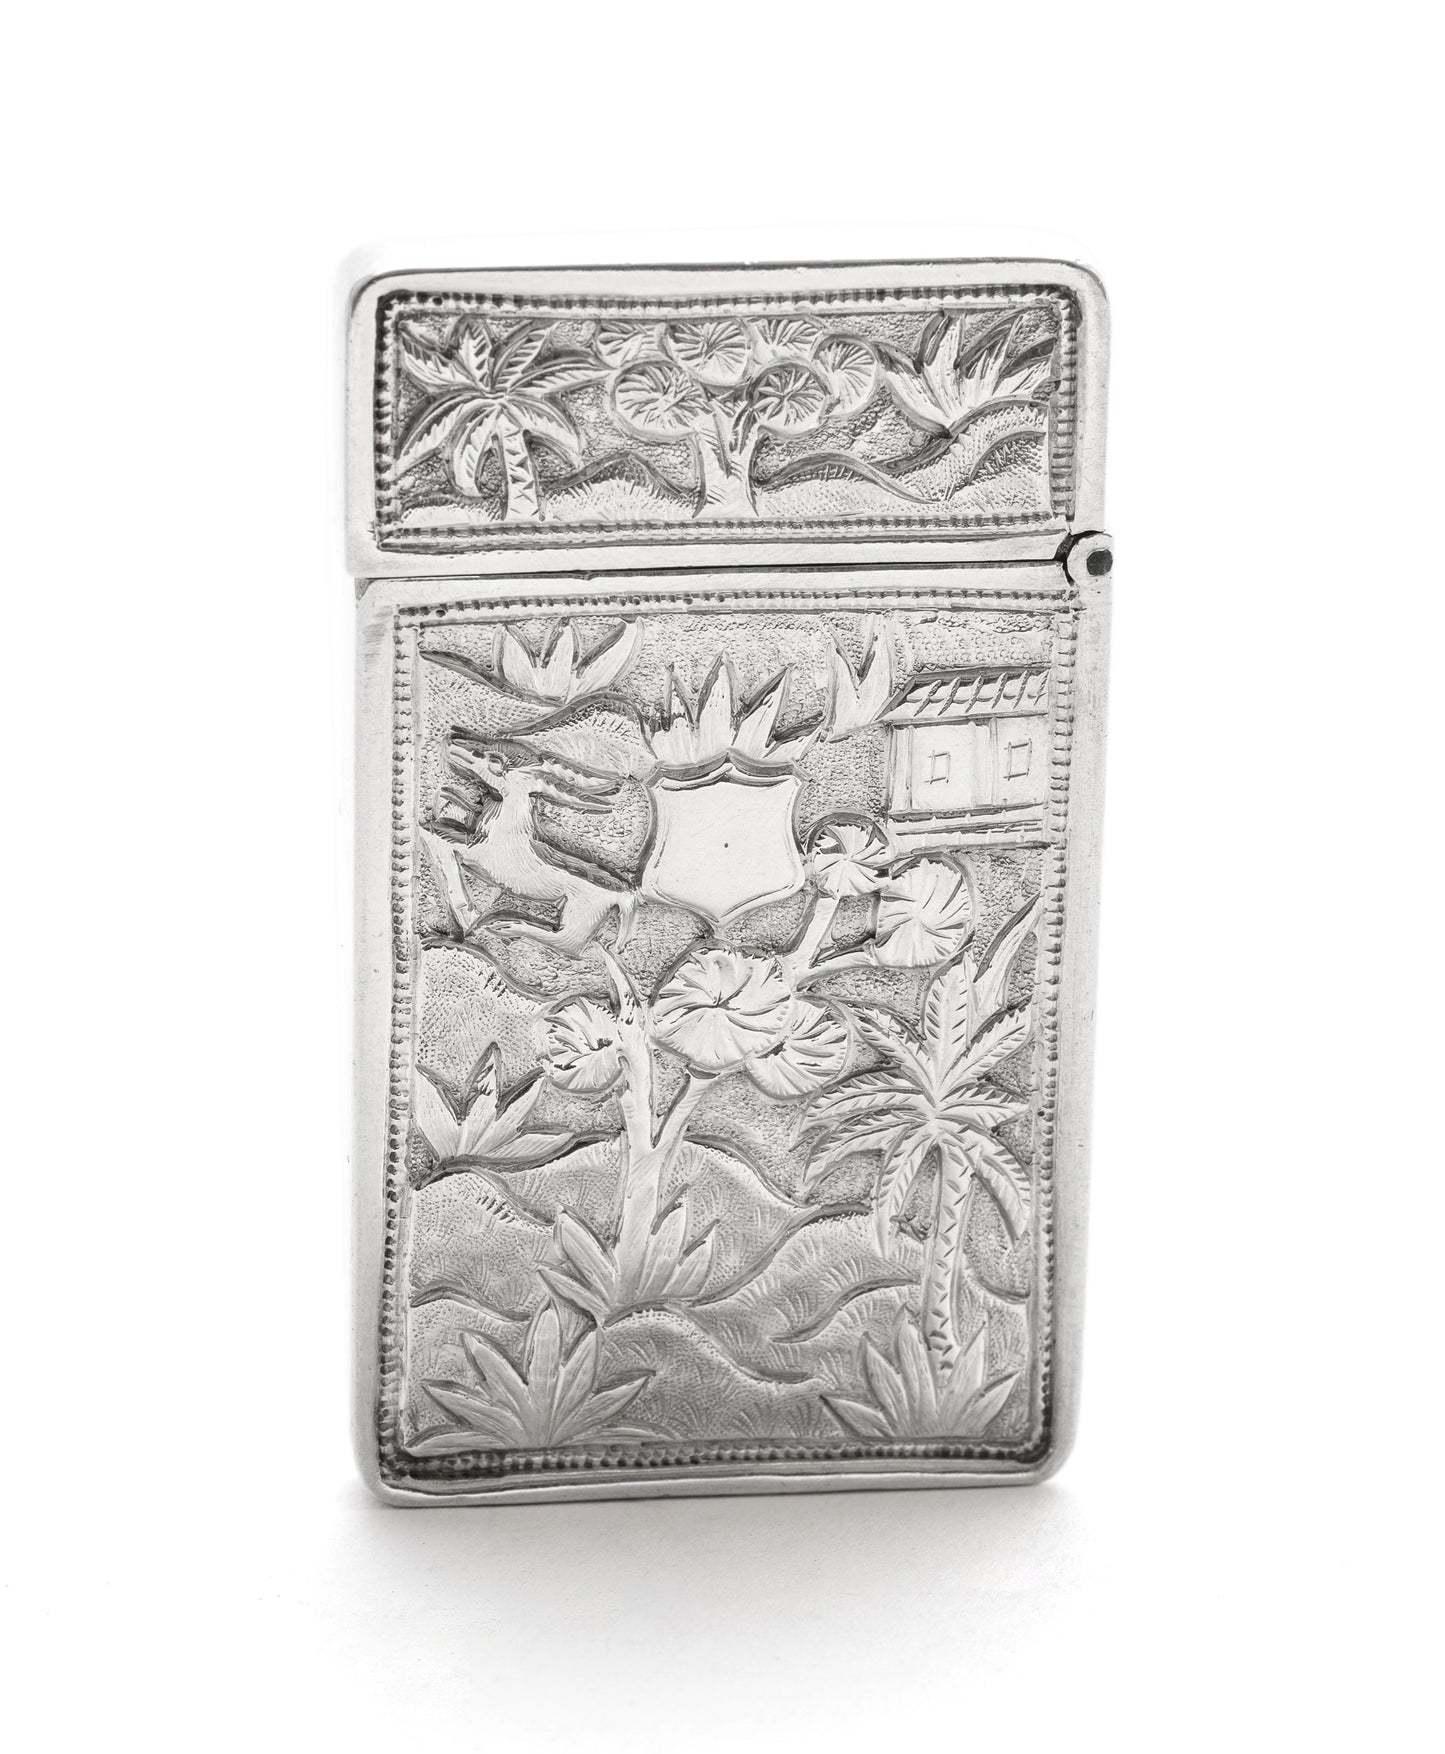 Antique Chinese Cast Silver Pictorial Card Case with Crane, River & Cartouche (Code 2119)